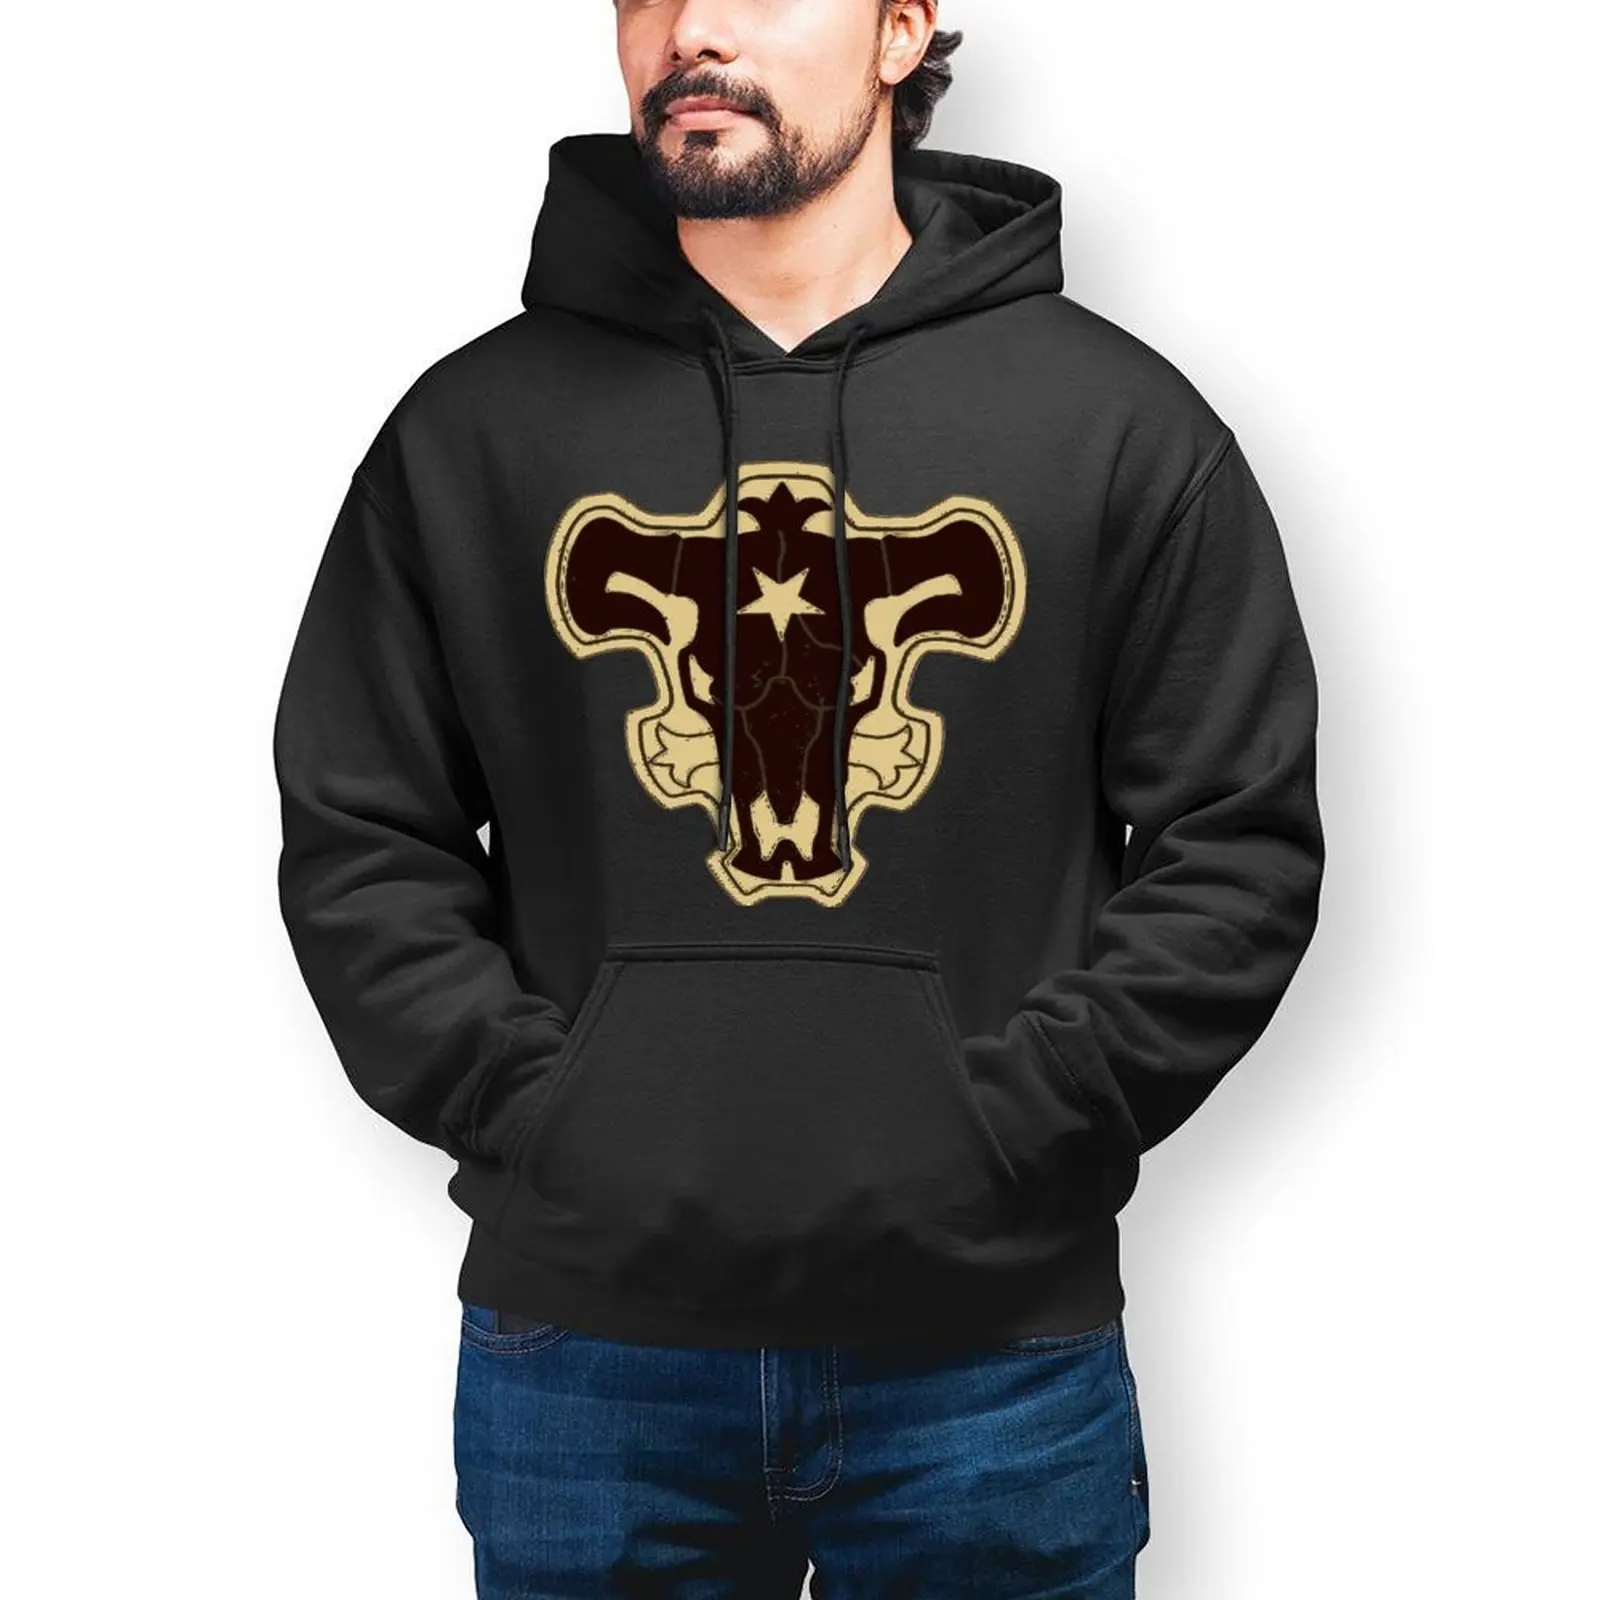 

Black Clover Casual Hoodies Male Black Bull Squad Pretty Pullover Hoodie Autumn Loose Design Hooded Sweatshirts Oversize Clothes